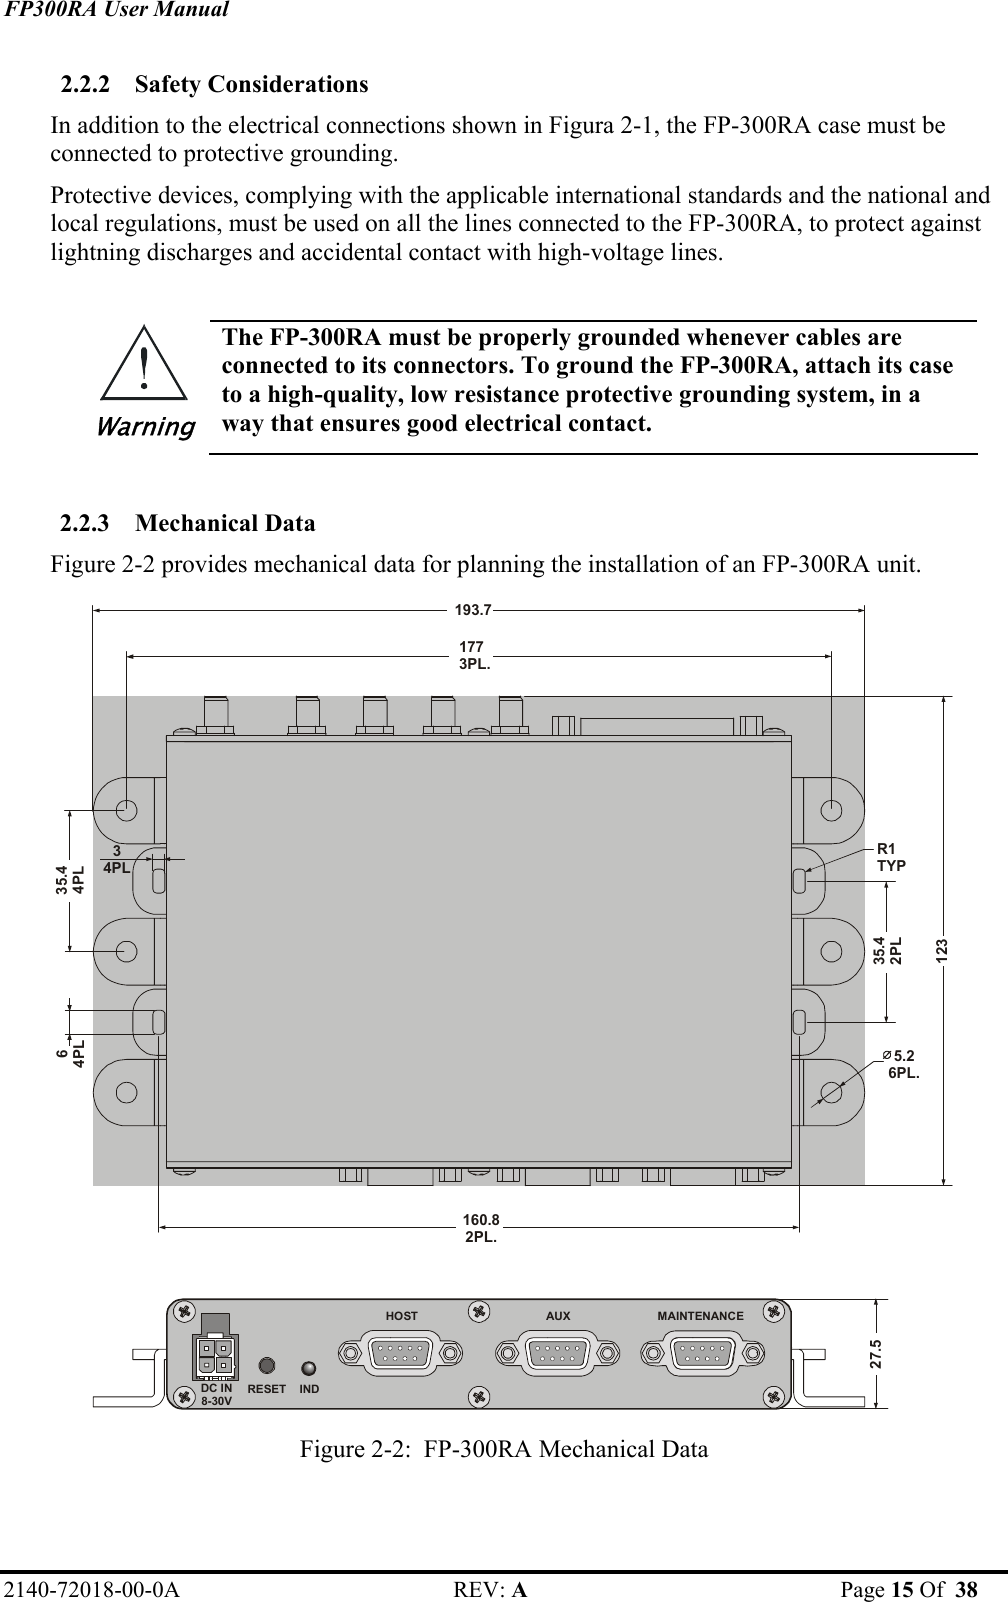 FP300RA User Manual 2140-72018-00-0A REV: A  Page 15 Of  38  2.2.2 Safety Considerations In addition to the electrical connections shown in Figura 2-1, the FP-300RA case must be connected to protective grounding.  Protective devices, complying with the applicable international standards and the national and local regulations, must be used on all the lines connected to the FP-300RA, to protect against lightning discharges and accidental contact with high-voltage lines.  Warning The FP-300RA must be properly grounded whenever cables are connected to its connectors. To ground the FP-300RA, attach its case to a high-quality, low resistance protective grounding system, in a way that ensures good electrical contact.  2.2.3 Mechanical Data Figure 2-2 provides mechanical data for planning the installation of an FP-300RA unit. 27.5DC IN8-30VAUX               HOST                     MAINTENANCERESET    IND34PL35.44PL64PL5.26PL.R1TYP35.42PL160.82PL.1773PL.193.7123 Figure 2-2:  FP-300RA Mechanical Data 